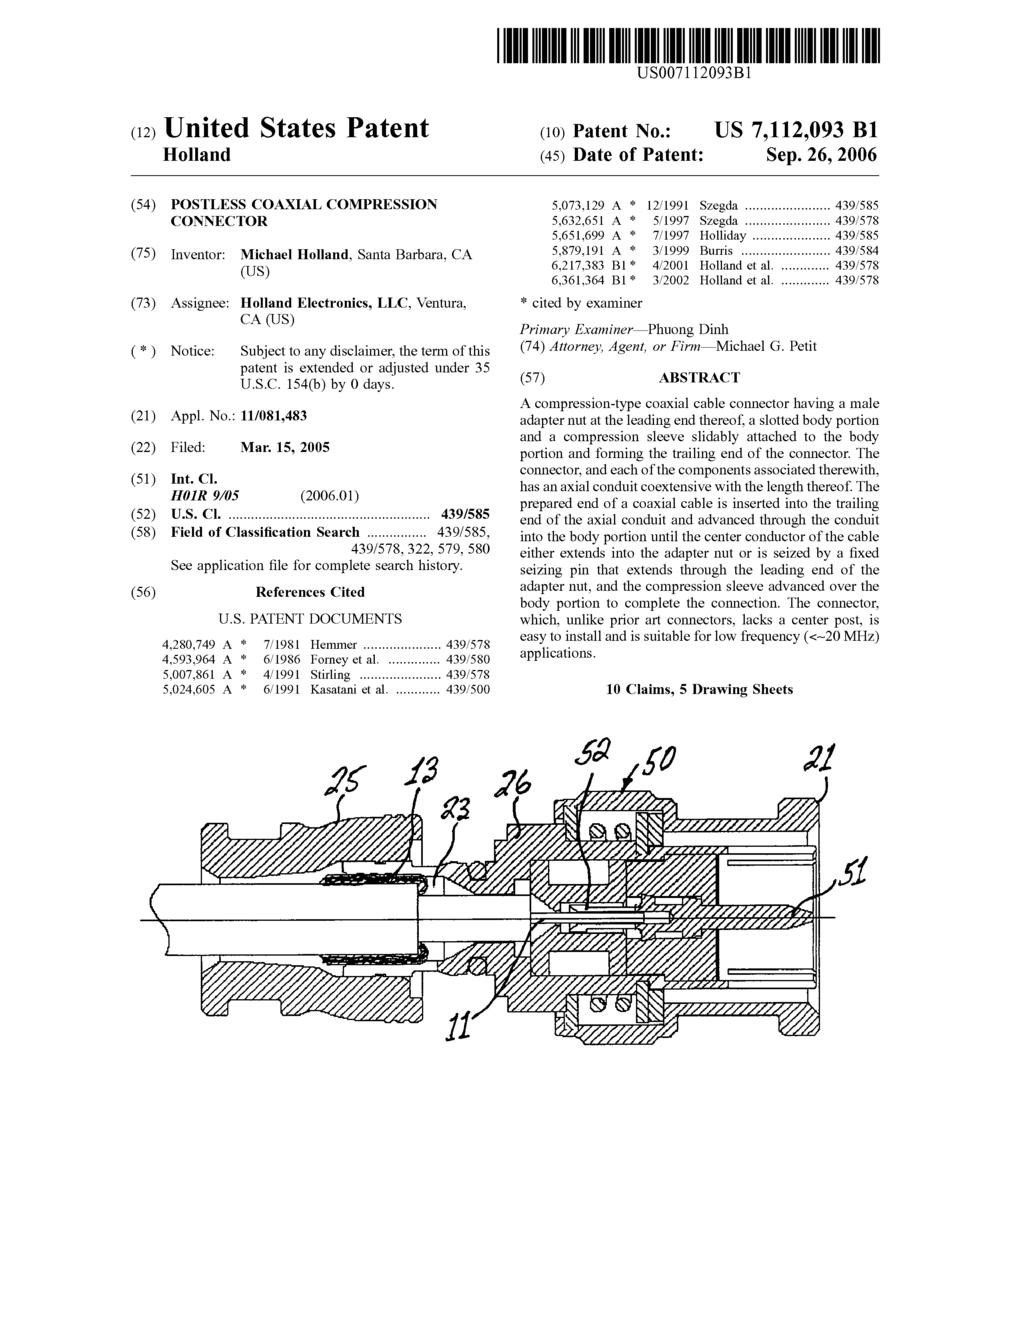 United States Patent US007 112093B1 (12) (10) Patent No.: Holland (45) Date of Patent: Sep. 26, 2006 (54) POSTLESS COAXIAL COMPRESSION 5,073,129 A * 12/1991 Szegda.